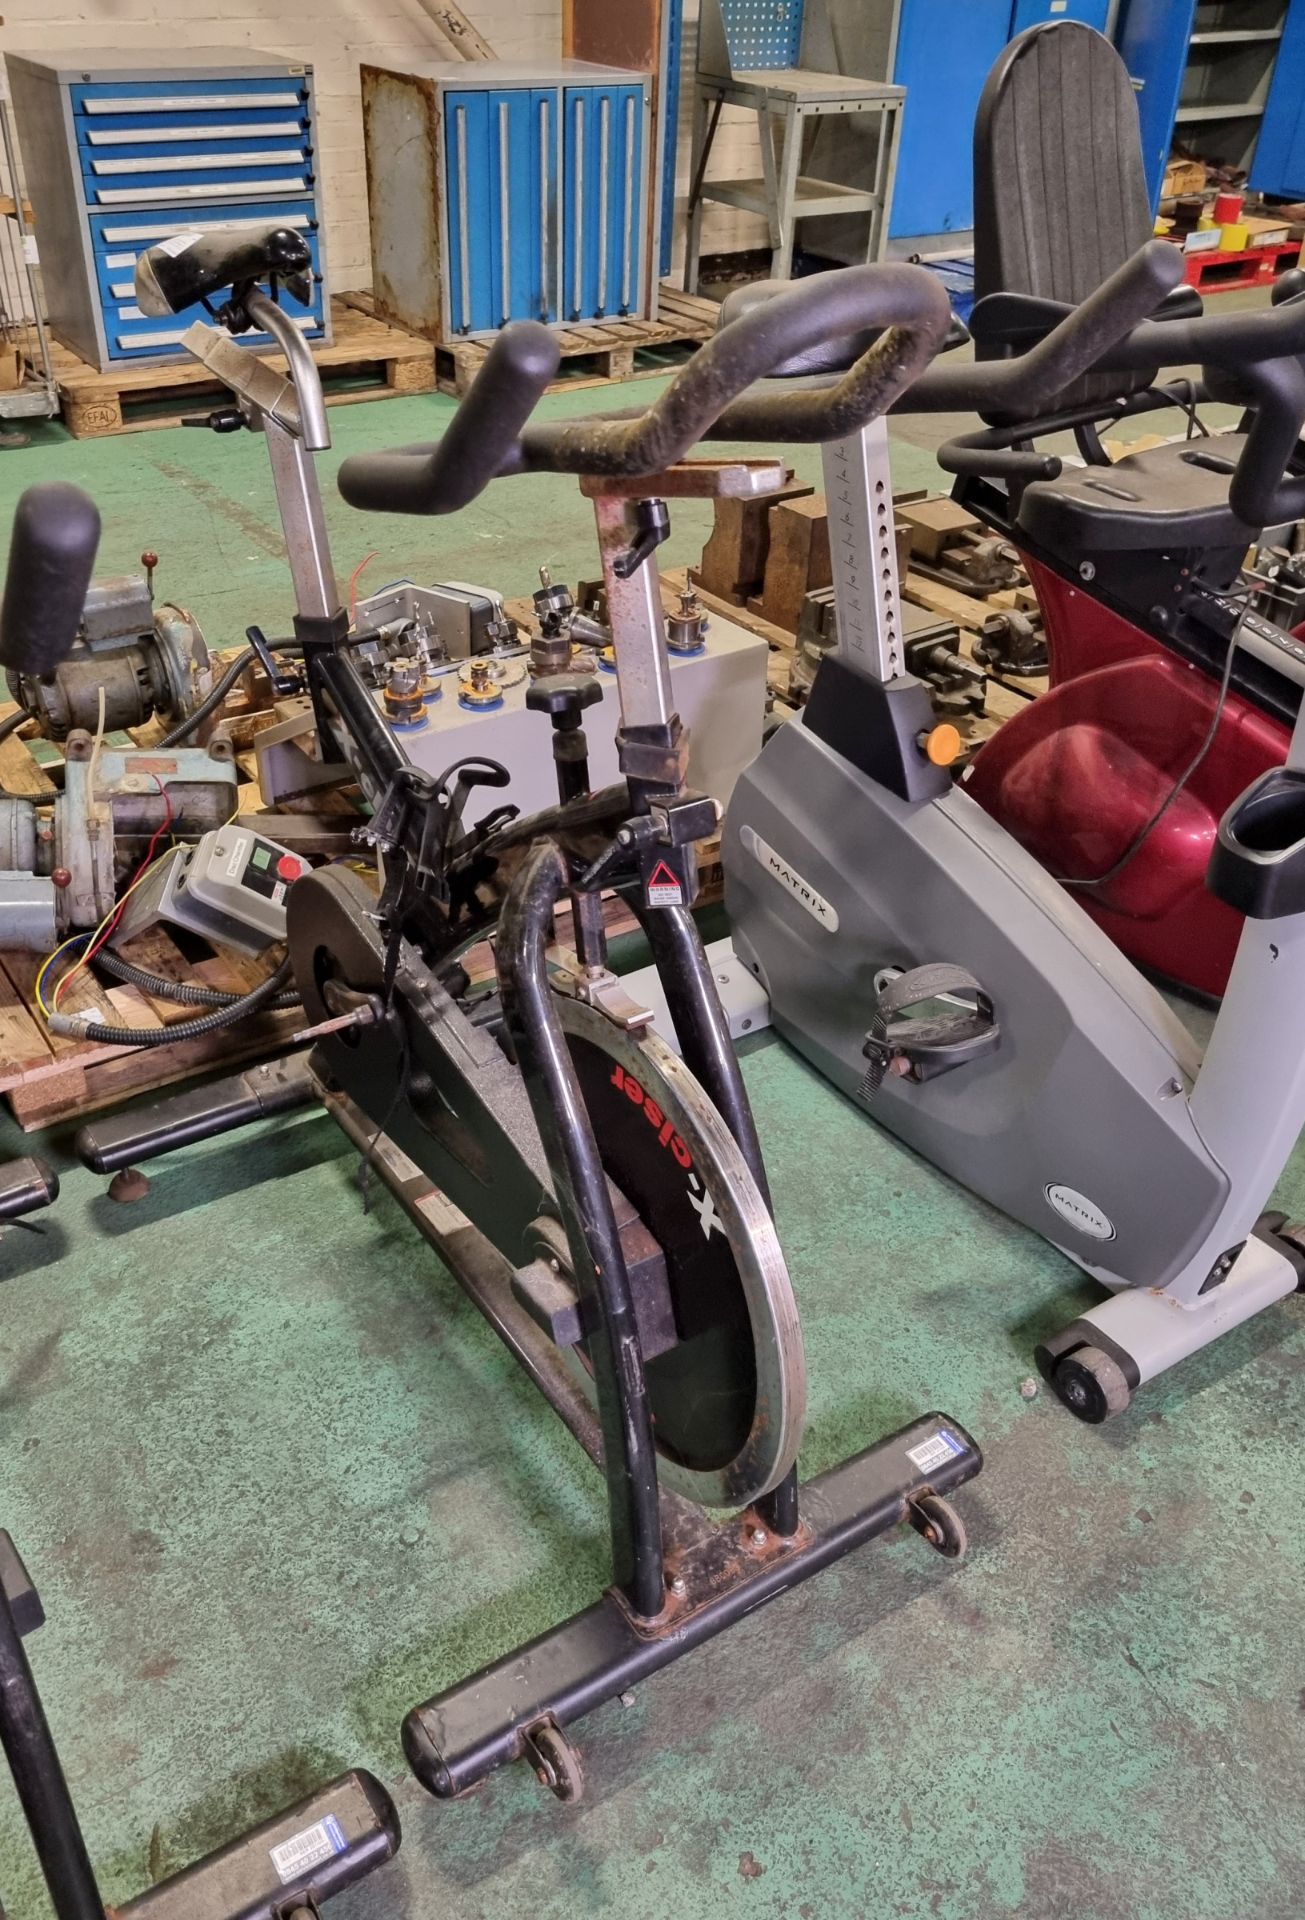 3x Higol X-ciser spin bikes - mould on handlebars - W 1030 x D 630 x H 1210 mm - Image 10 of 14